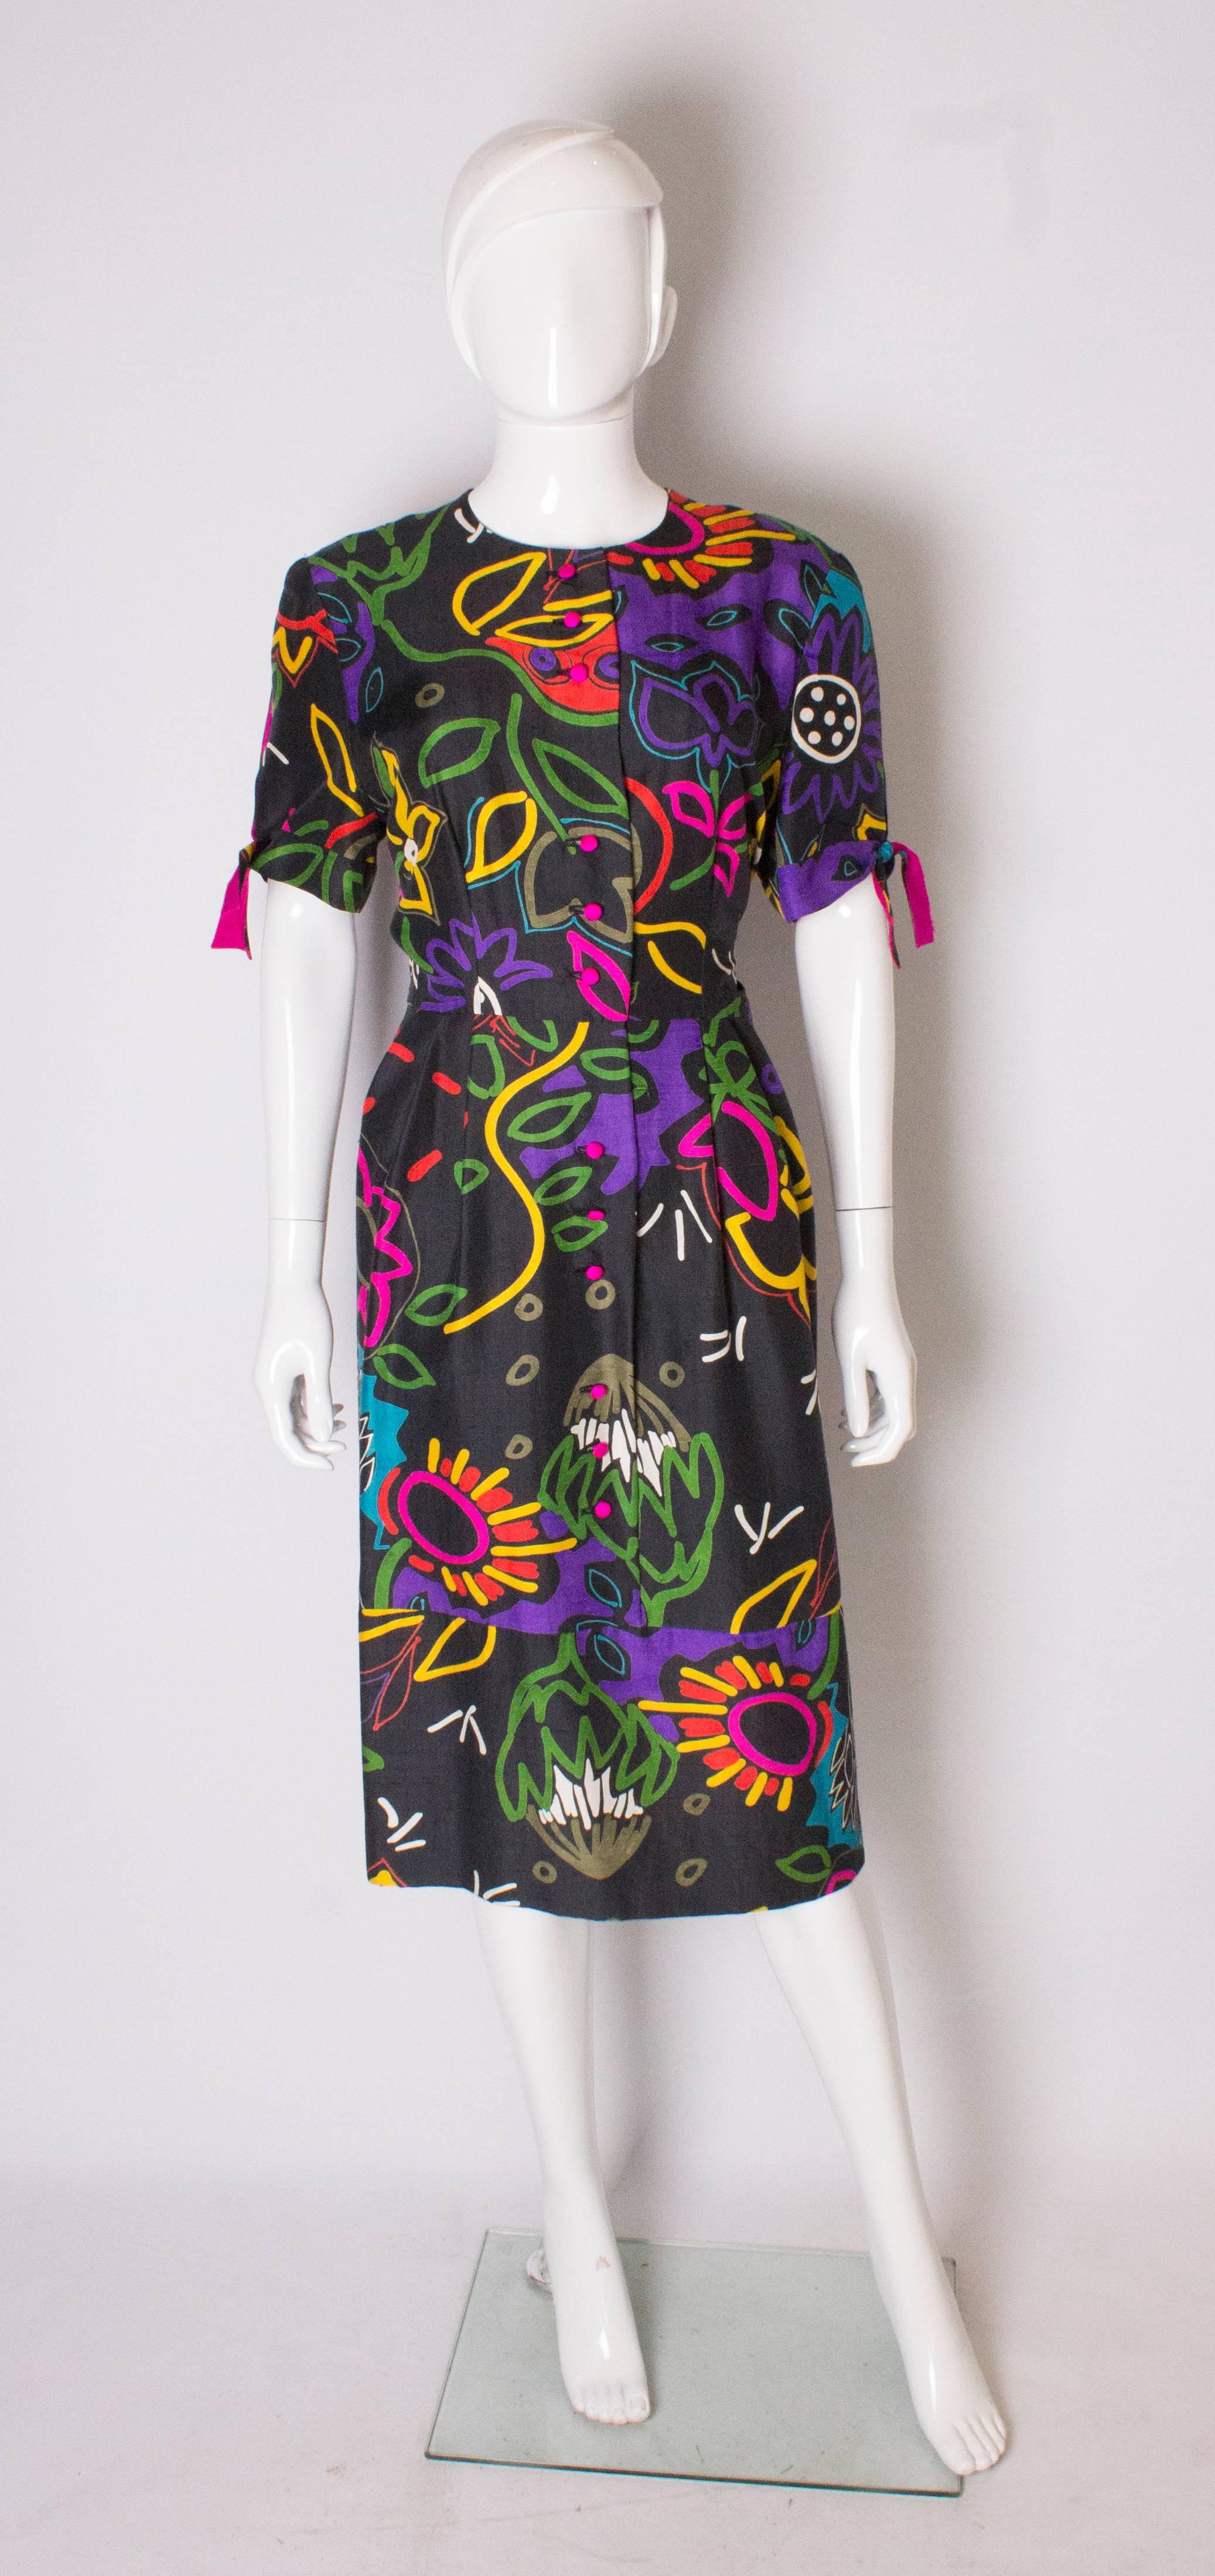 A chic day dress by British designer Donald Campbell. The silk dress has a black background with bright multicolour print. It has a button opening nearly down to the hem, and short sleaves with purple sikl tie detail